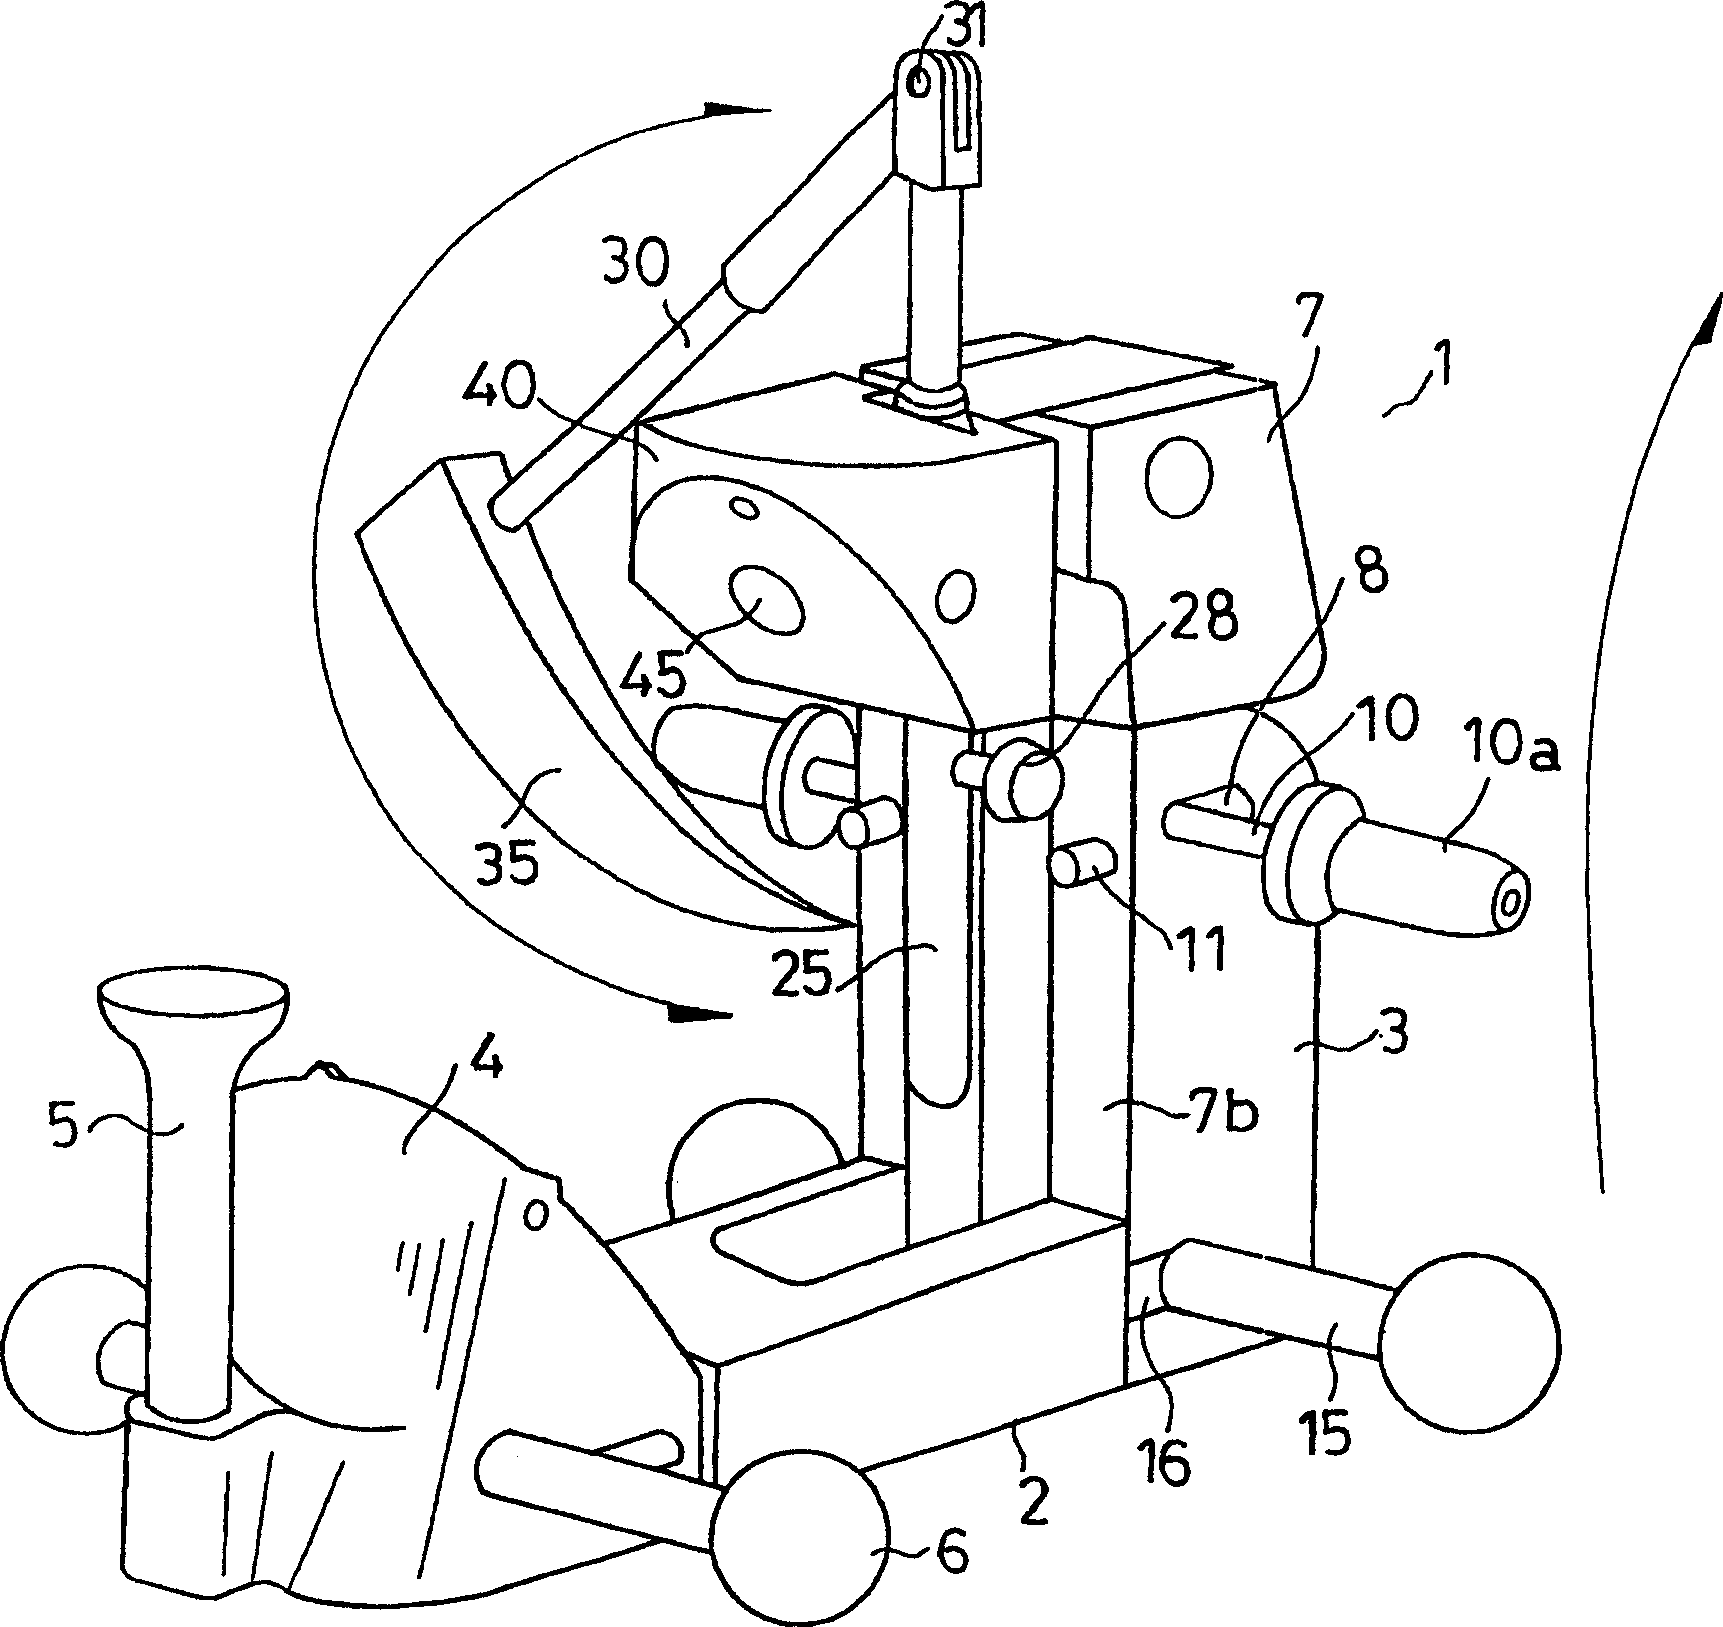 Denture base and method of preparing it and instrument used therefor